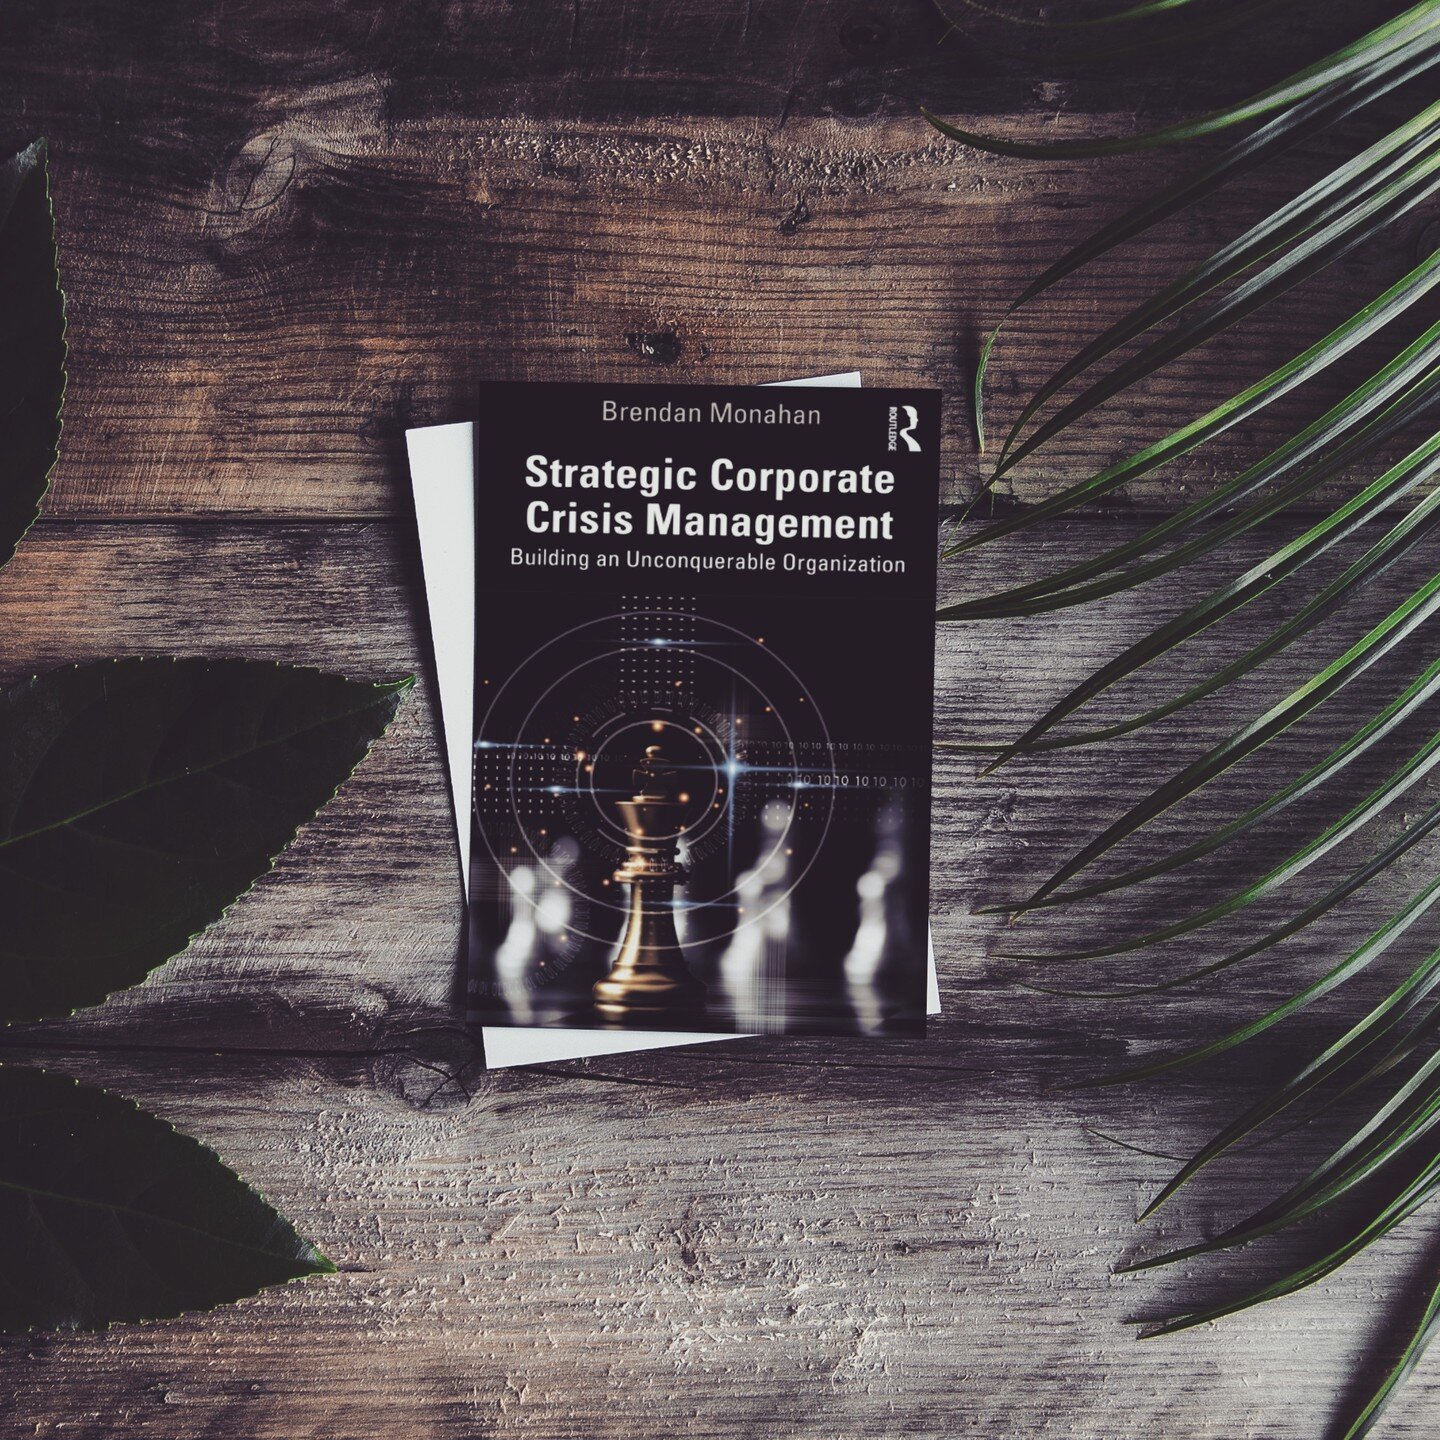 On October 31 my first book comes out - &quot;Strategic Corporate Crisis Management: Building an Unconquerable Organization.&quot;

Every crisis is a call to action. The origin of the word &ndash; a moment of decision &ndash; resonates within anyone 